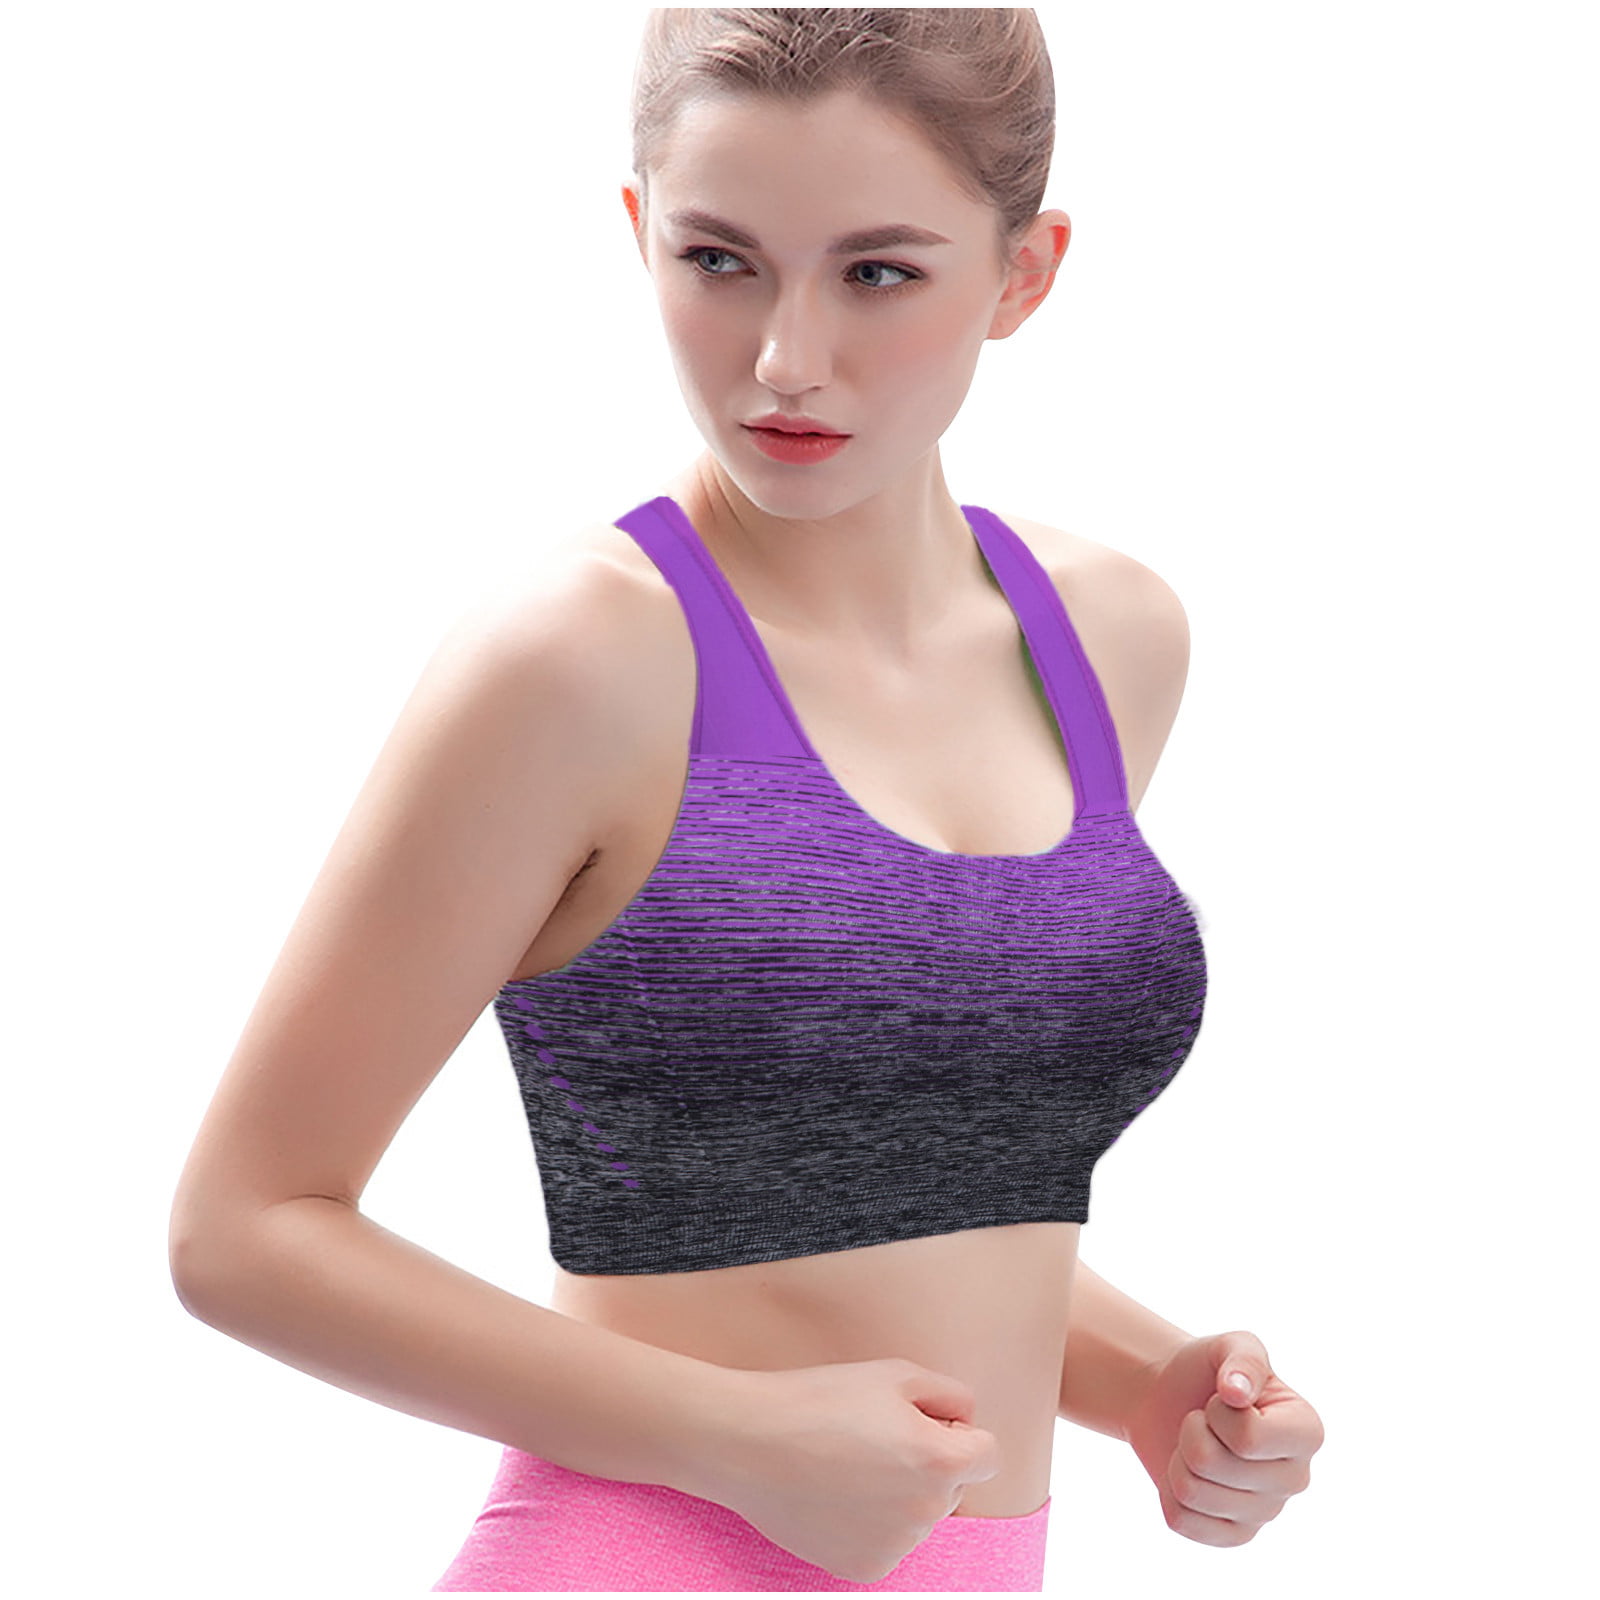 Details about   Women Anti-Shrink Padded Sports Bra And High Waist Leggings Set Fitness Clothing 